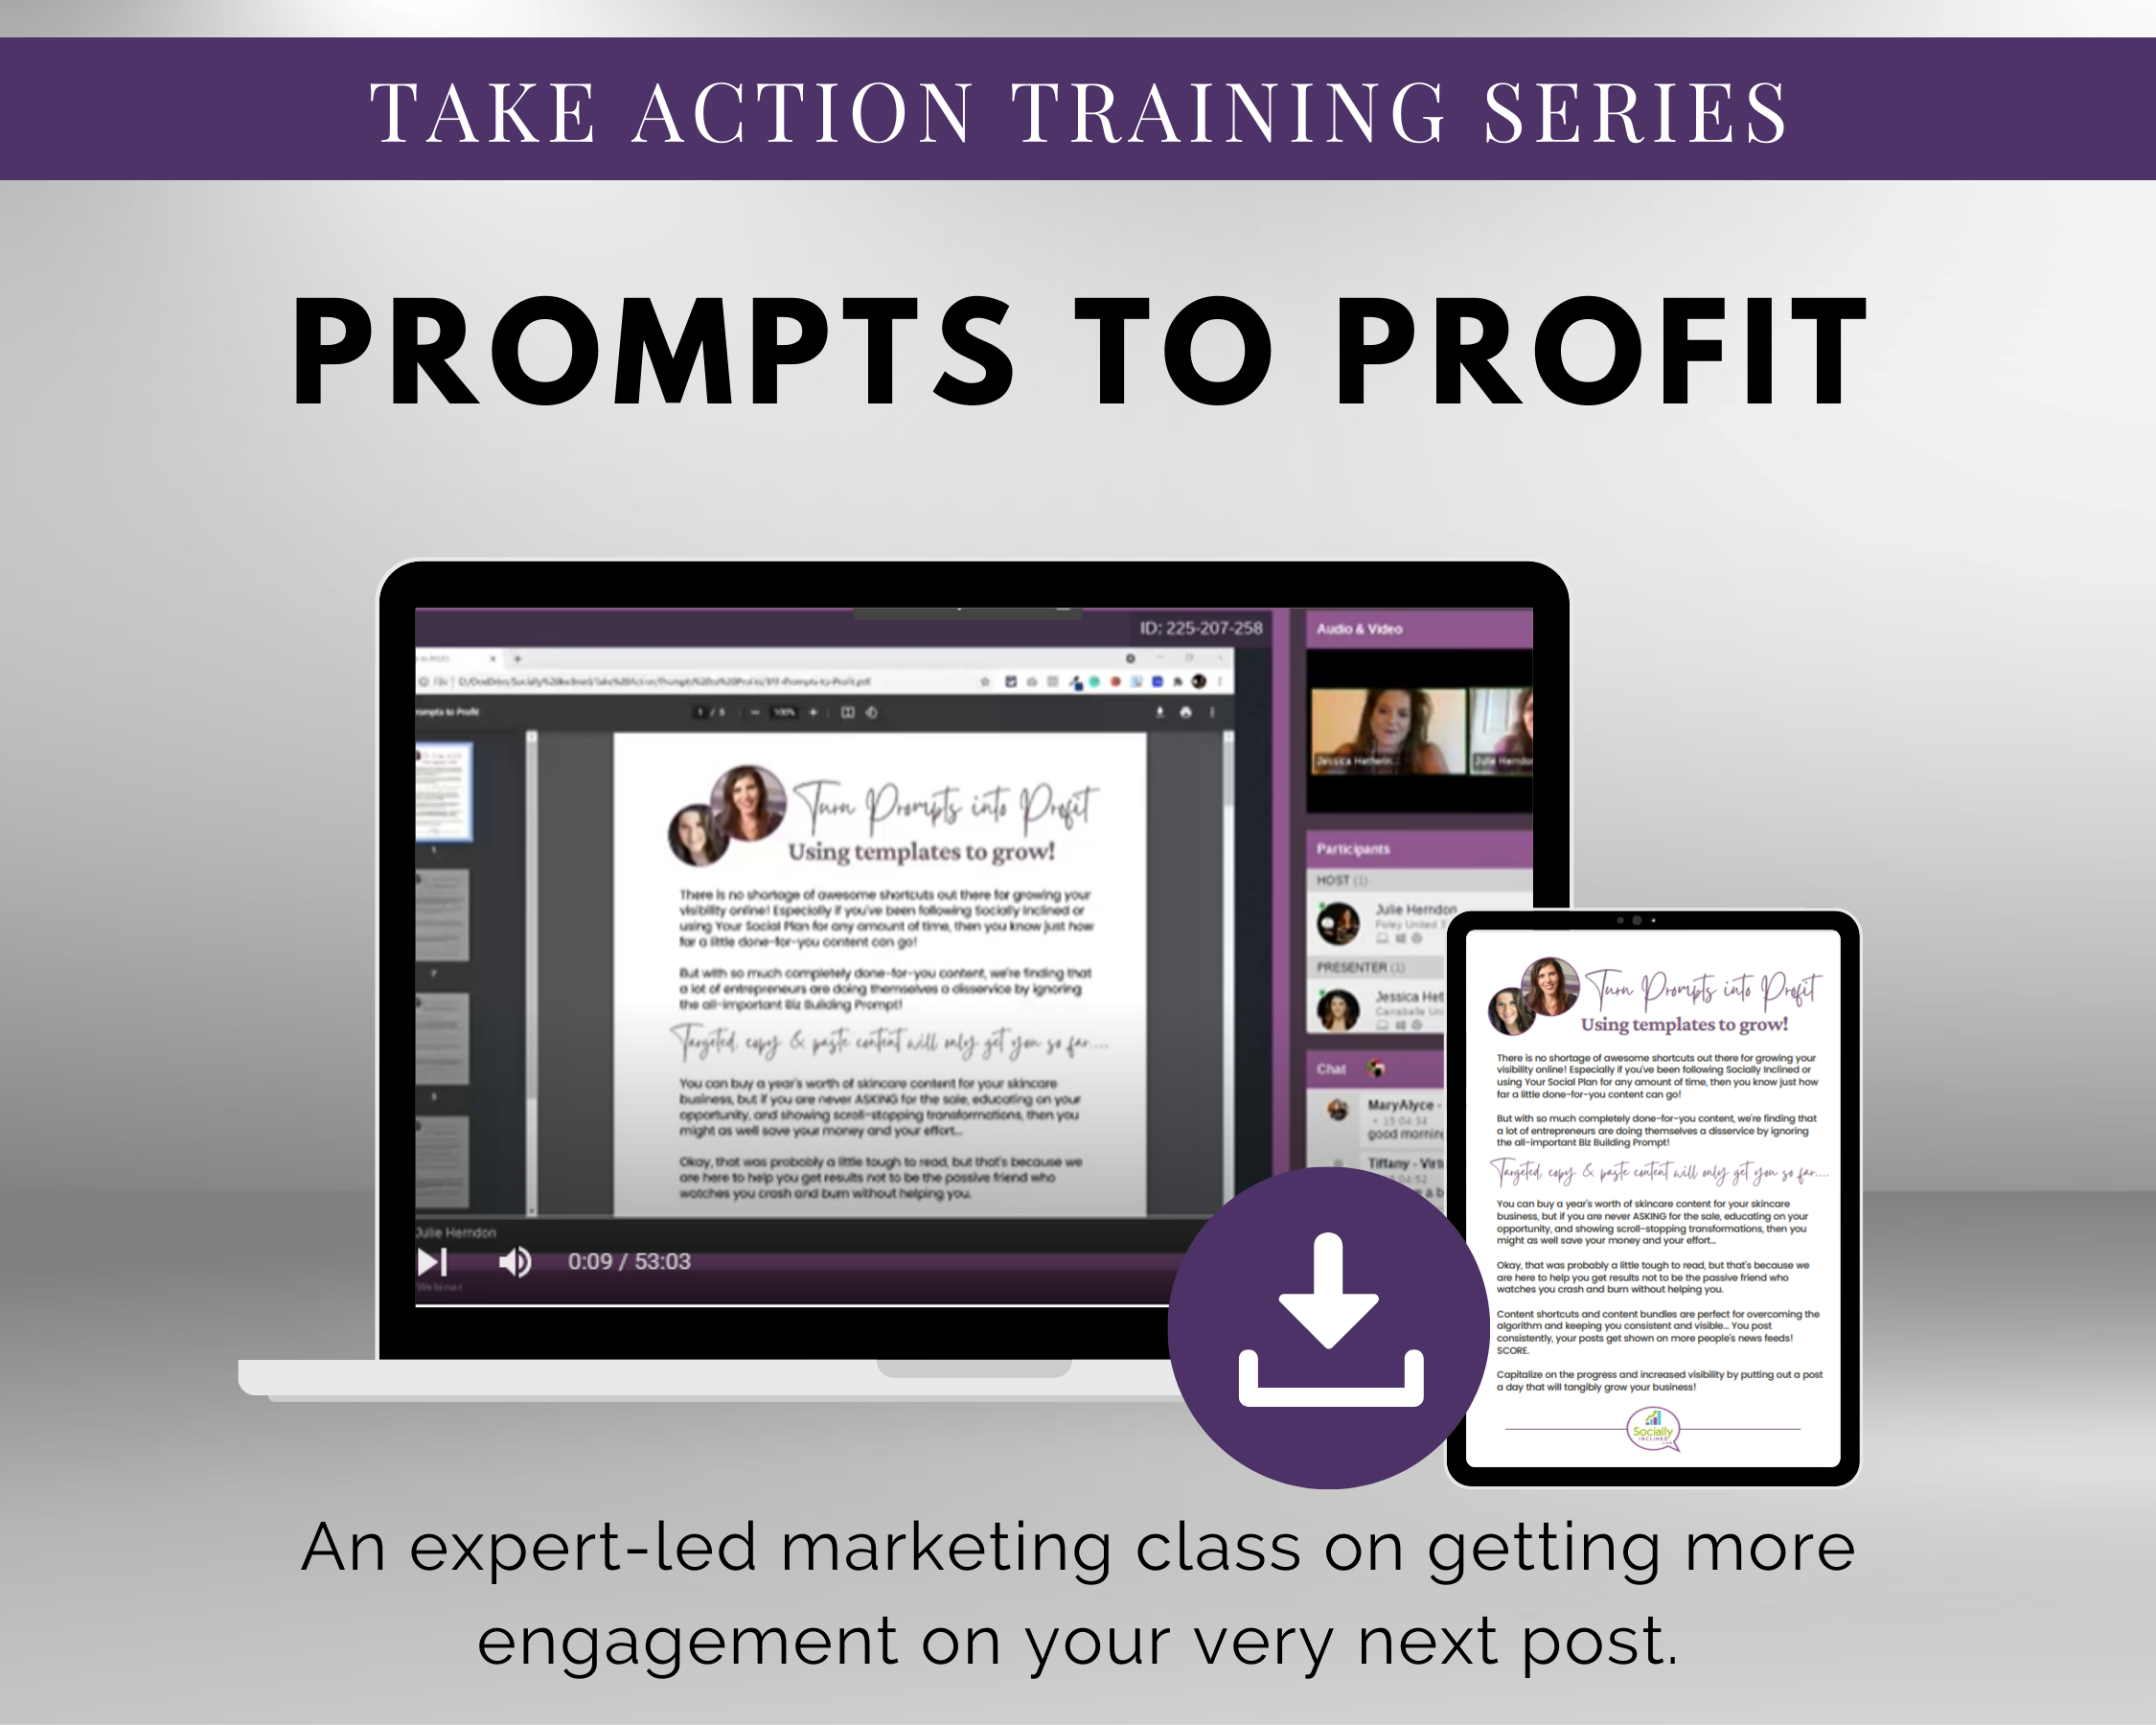 Take action training series TAT - Prompts to Profit Masterclass by Get Socially Inclined prompts to profit. Learn how to maximize your profits with our targeted training series. Gain valuable insights and strategies to generate higher revenue. Don't miss out on this opportunity to